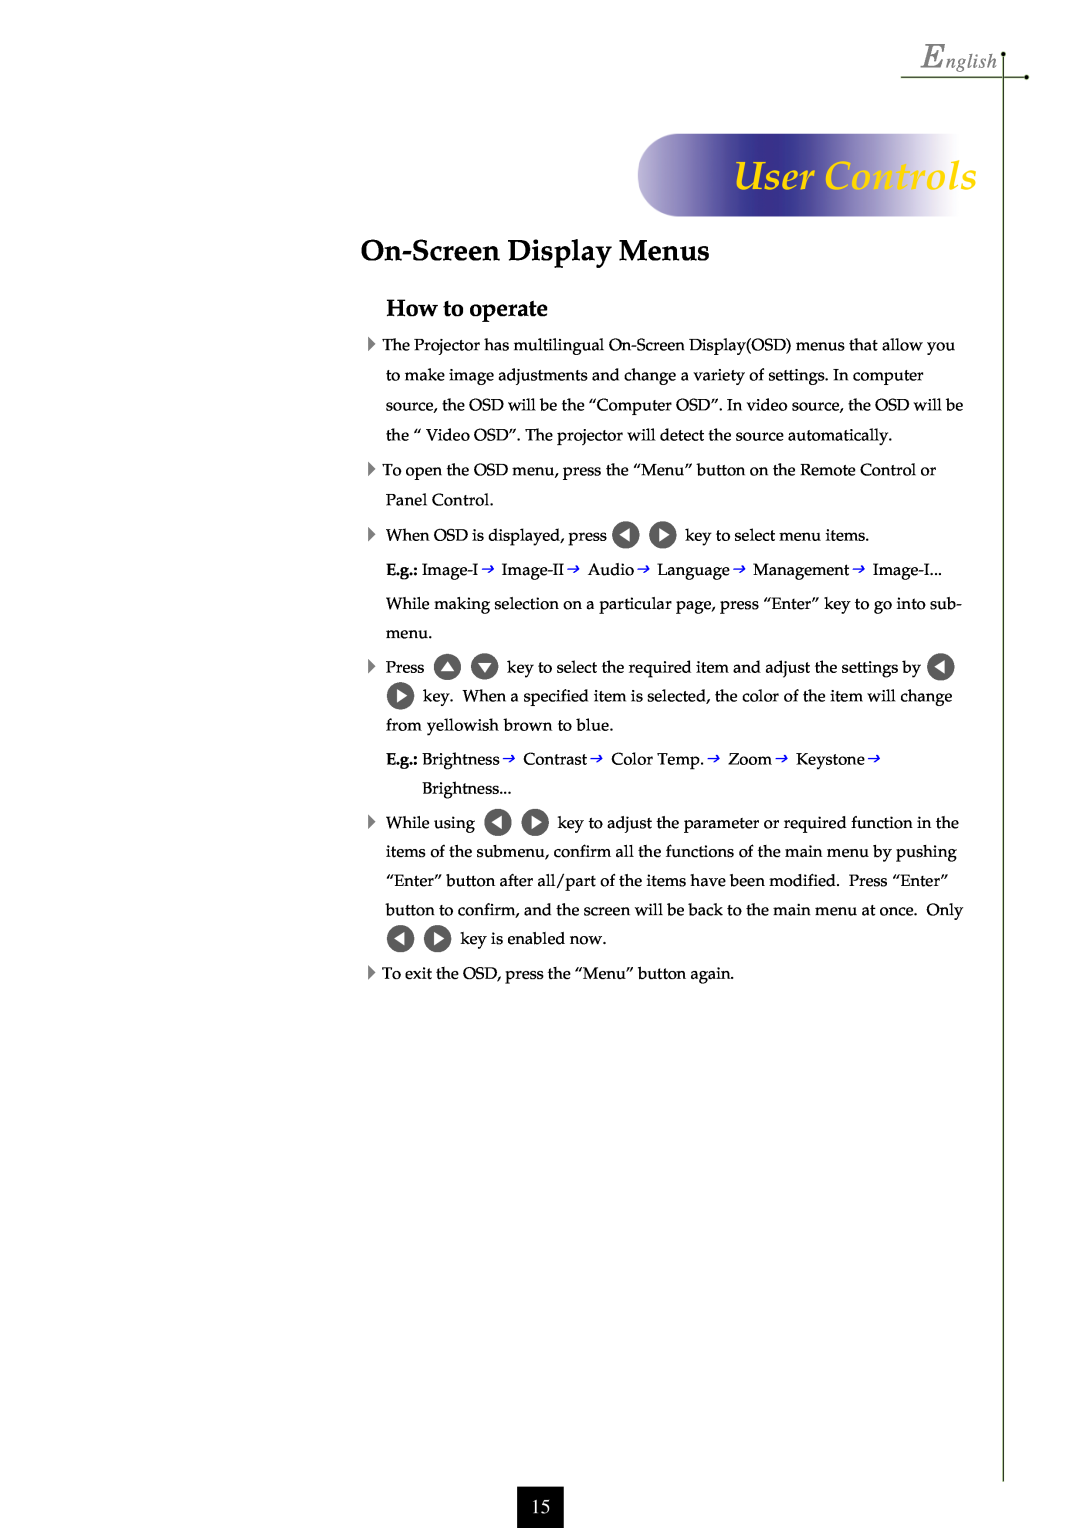 Optoma Technology EP750 specifications On-Screen Display Menus, How to operate, User Controls, English 